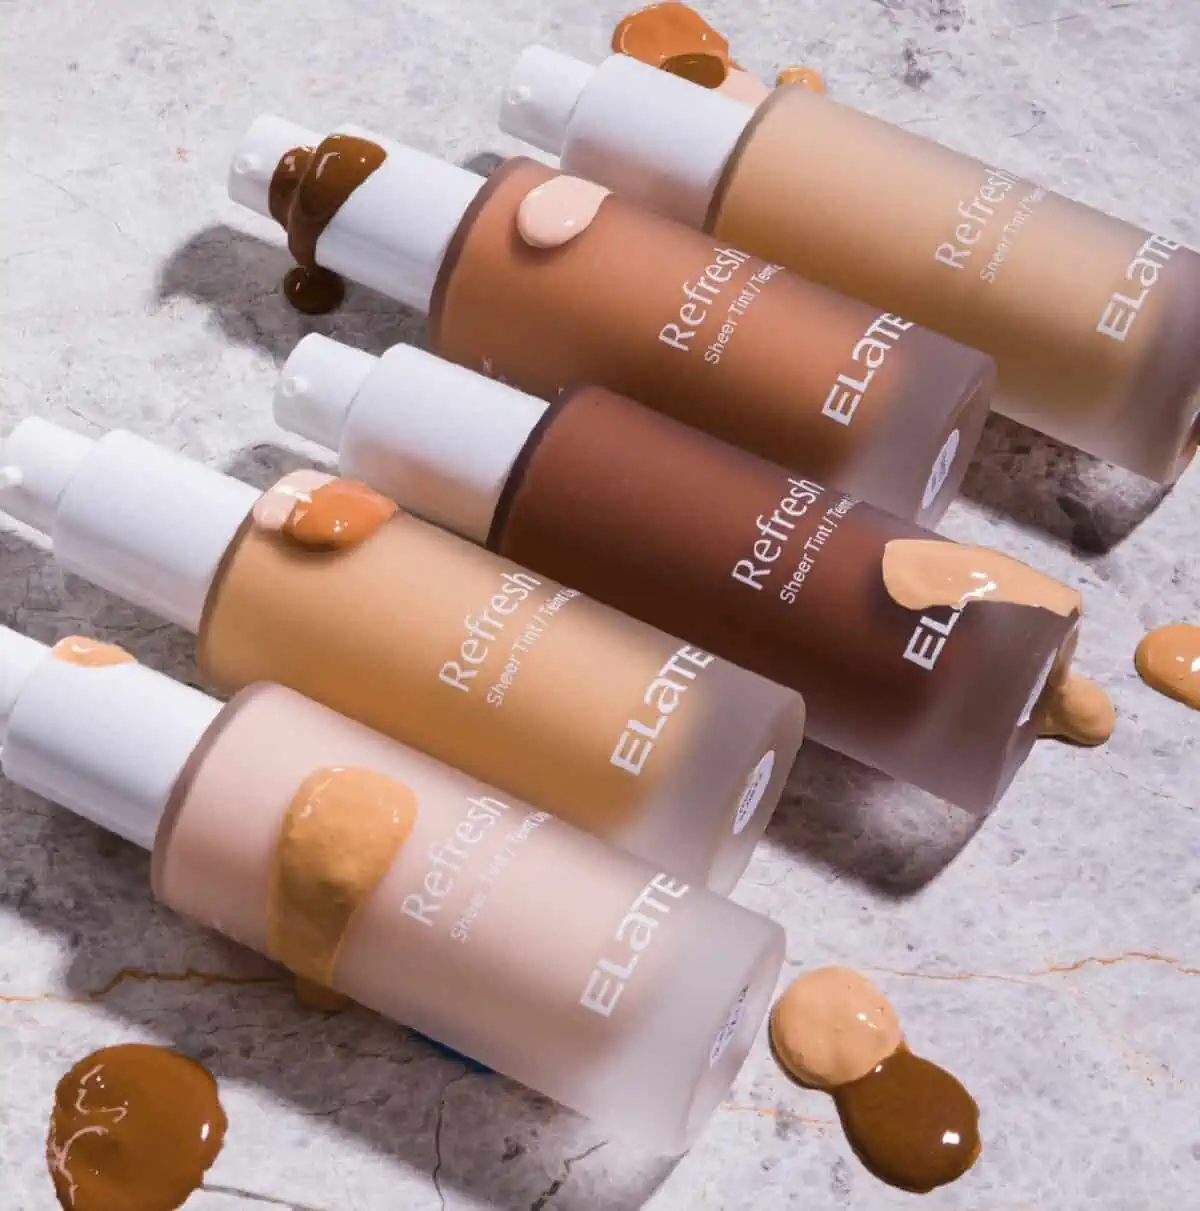 Five bottles of Elate Cosmetics liquid foundation laying on their side on a marble background accented by drops of foundation samples.